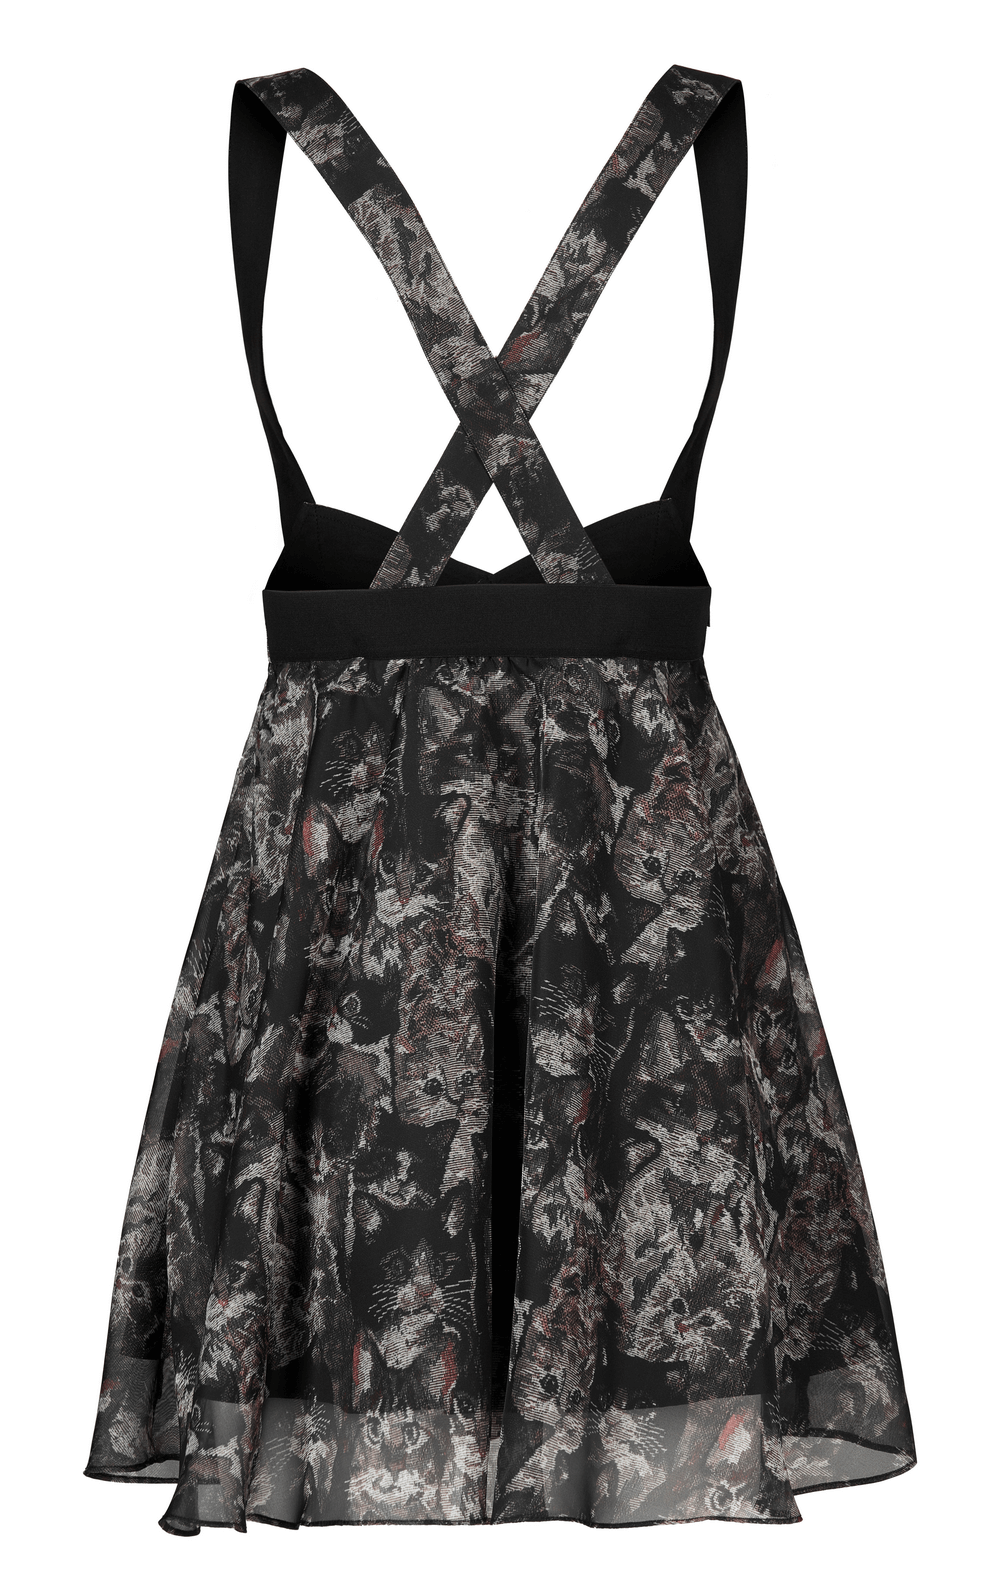 Floral Print Cross-Back A-line Skirt with Cat-Ear Detail